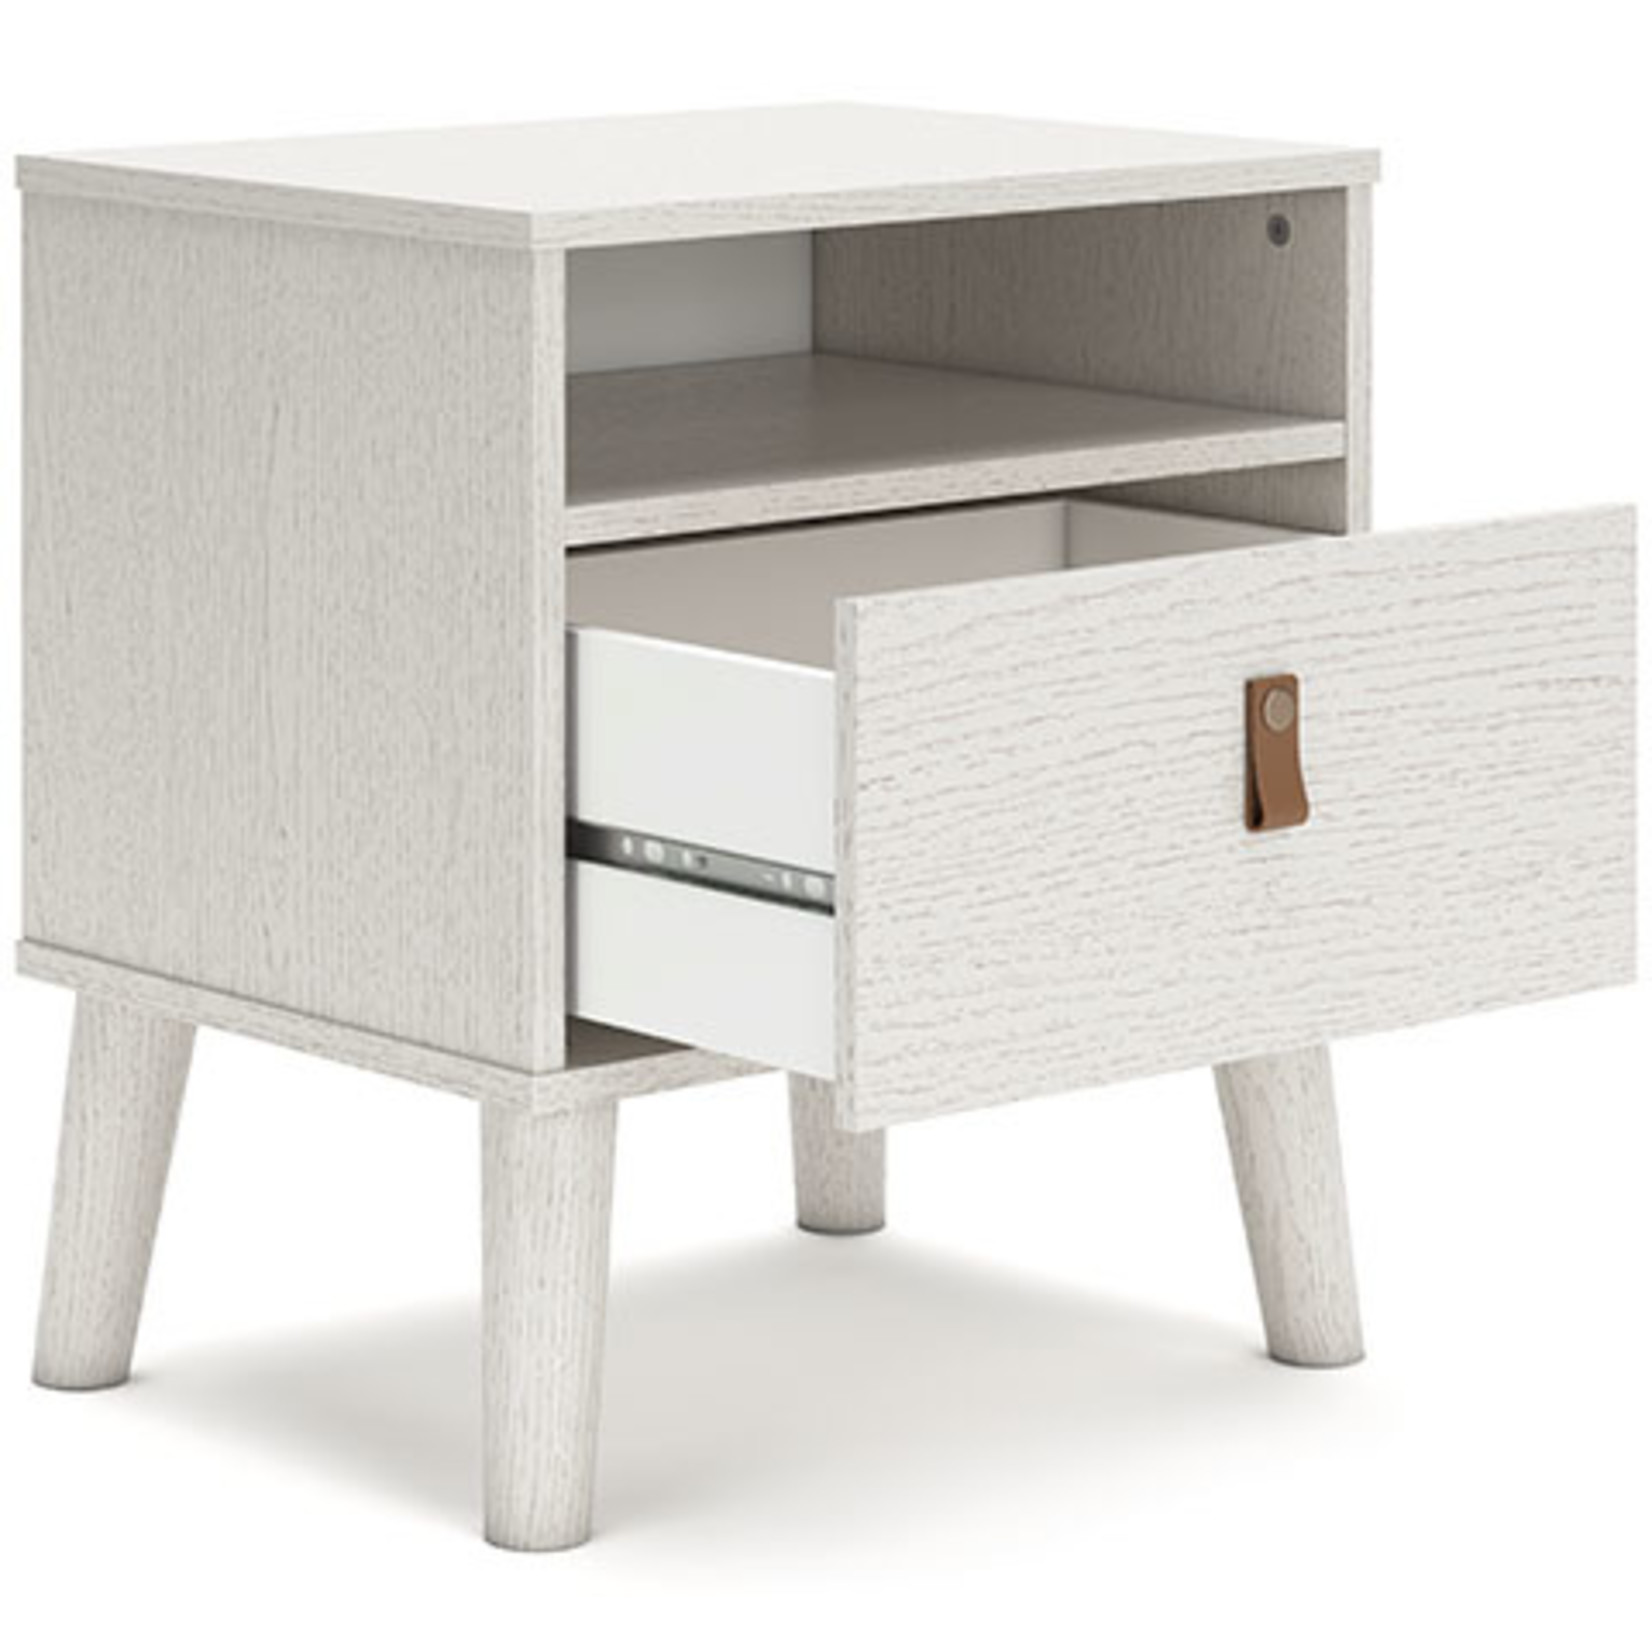 ASHLEY FURNITURE APRILYN WHITE NIGHT STAND BY ASHLEY